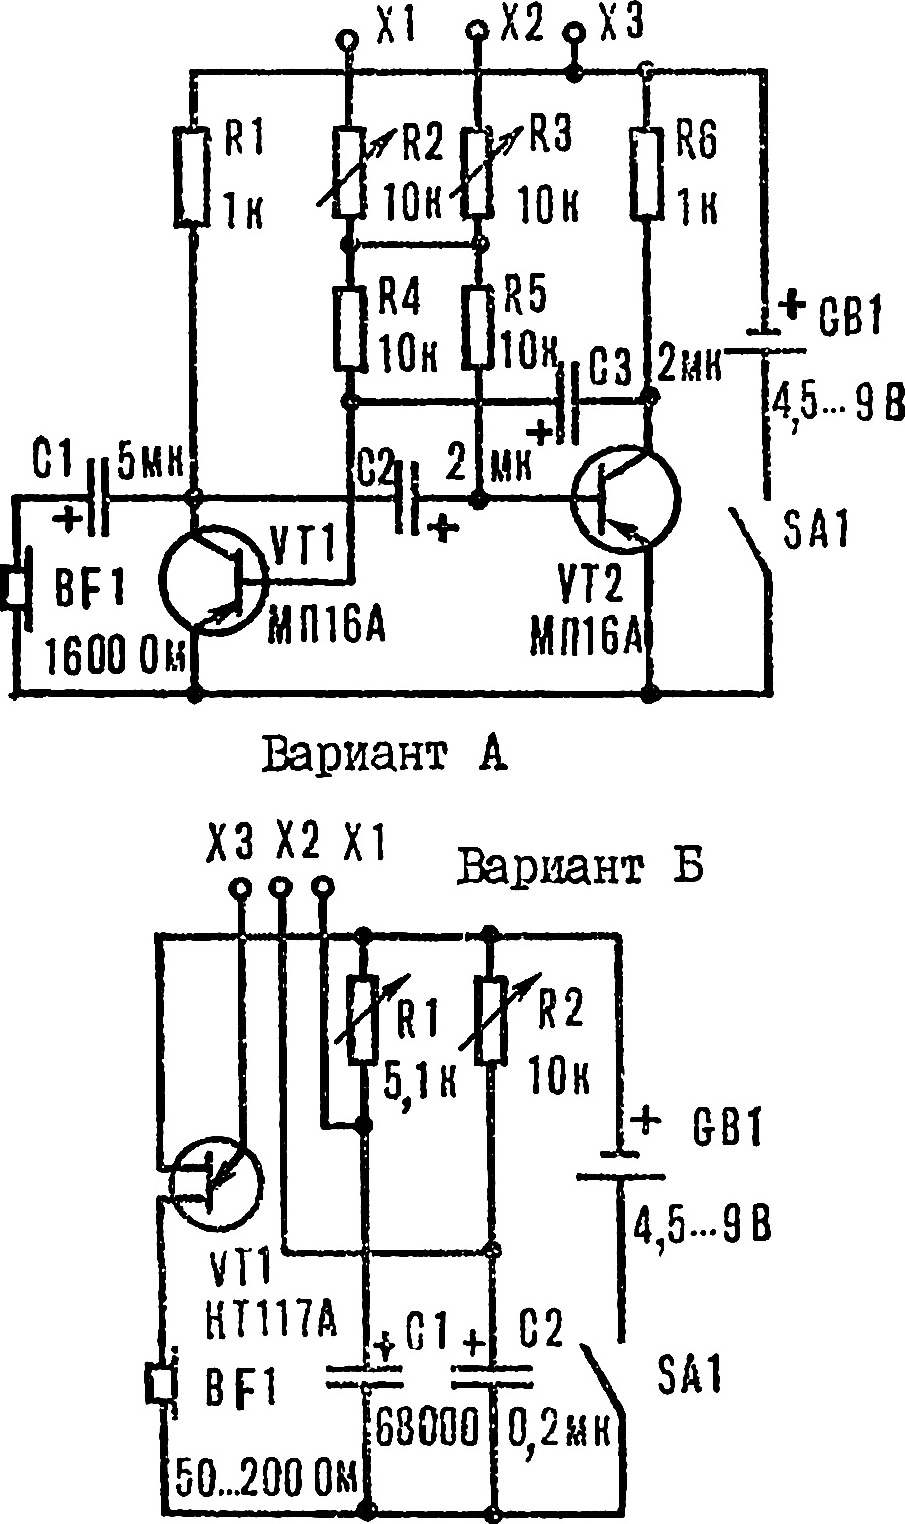 Fig. 3. The schematic diagram of the generator of the sound signal.